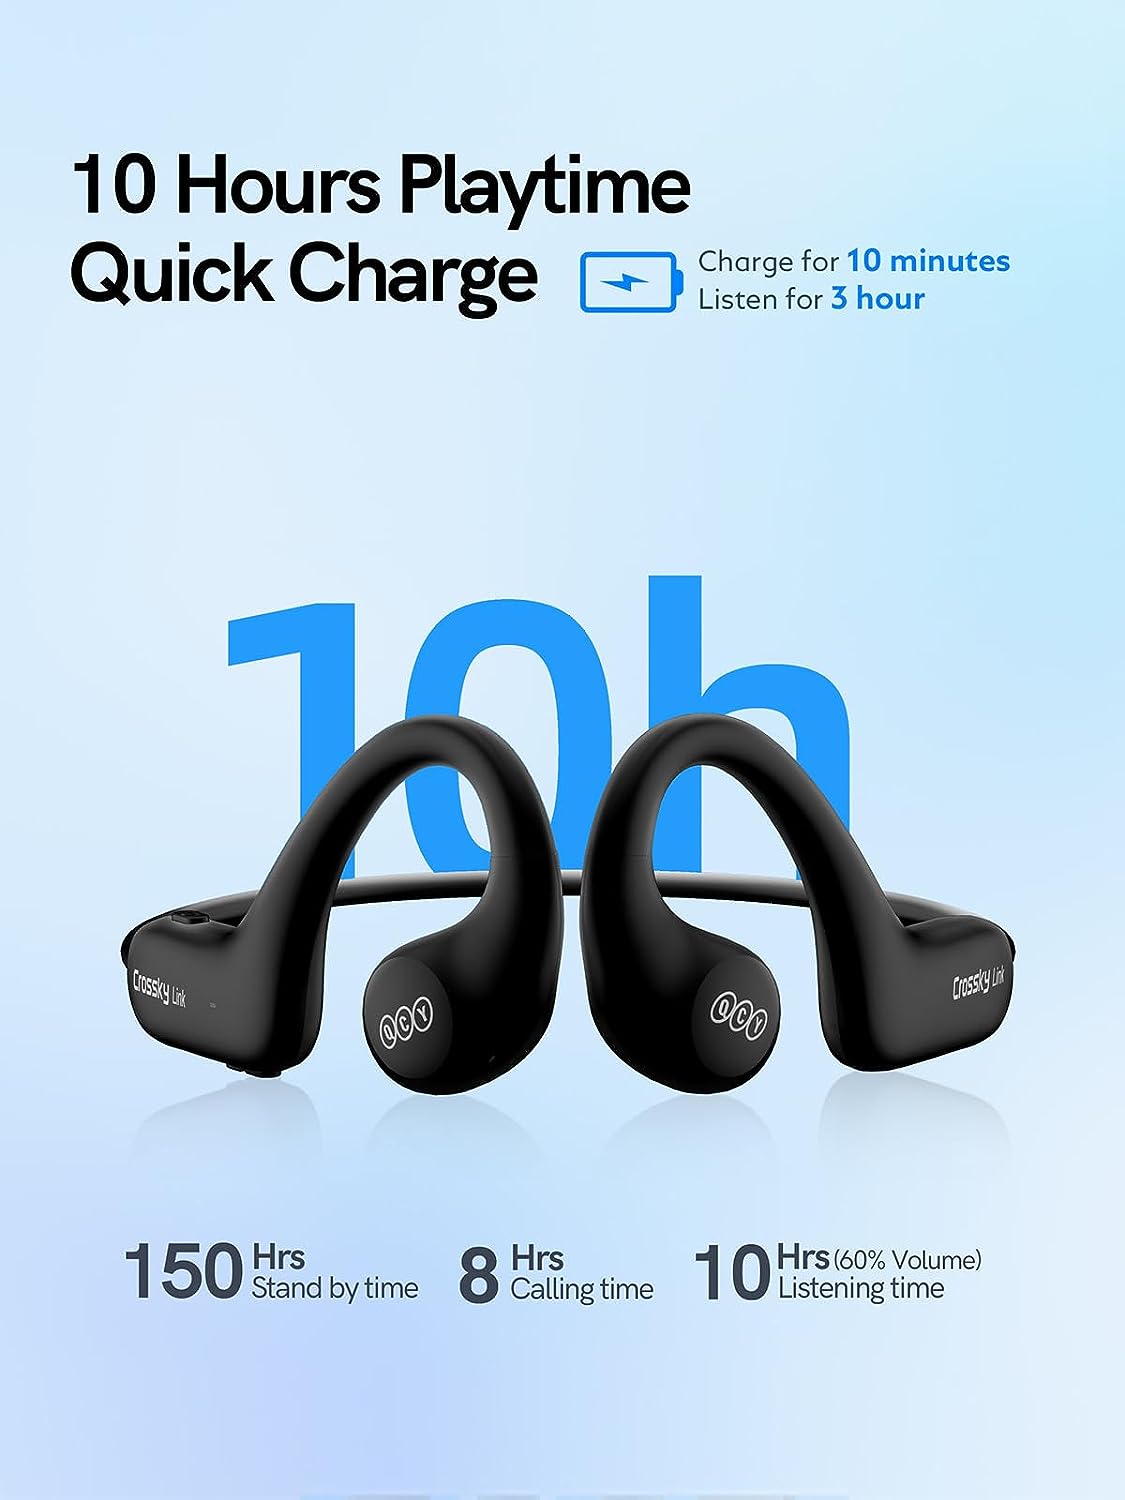 QCY Crossky Link Sports Earphones, Open Ear Design Headphones With 5.3 Bluetooth,4 Mic and ENC Noise Cancellation,IPX6 Waterproof and Sweatproof,No Sound Leakage and 360 Degree Panoramic Sound - Black